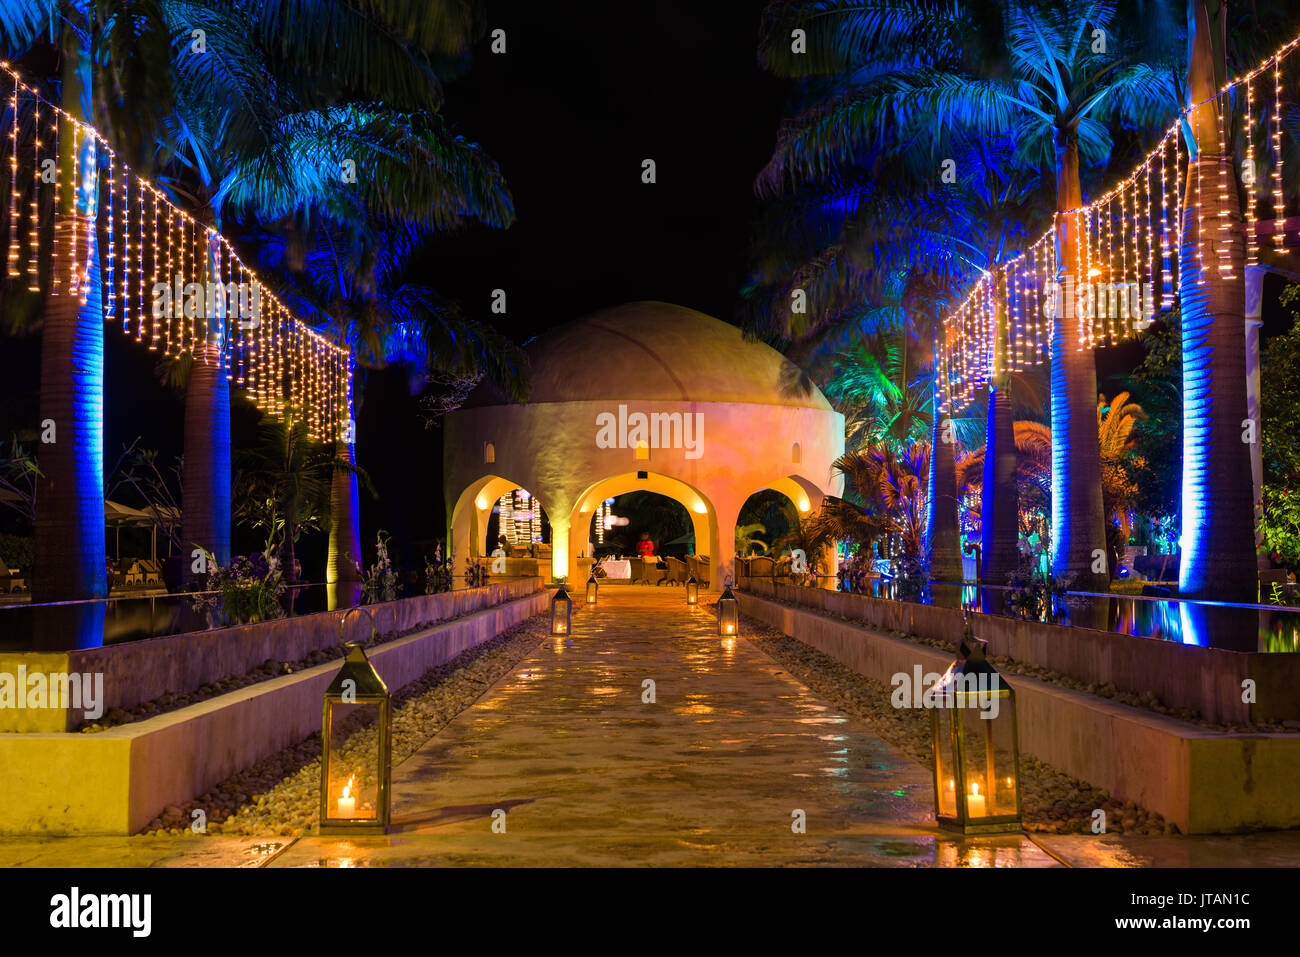 Swahili Beach Resort Exterior Reflection Pools And Dome At Night With Lights, Diani, Kenya Stock Photo